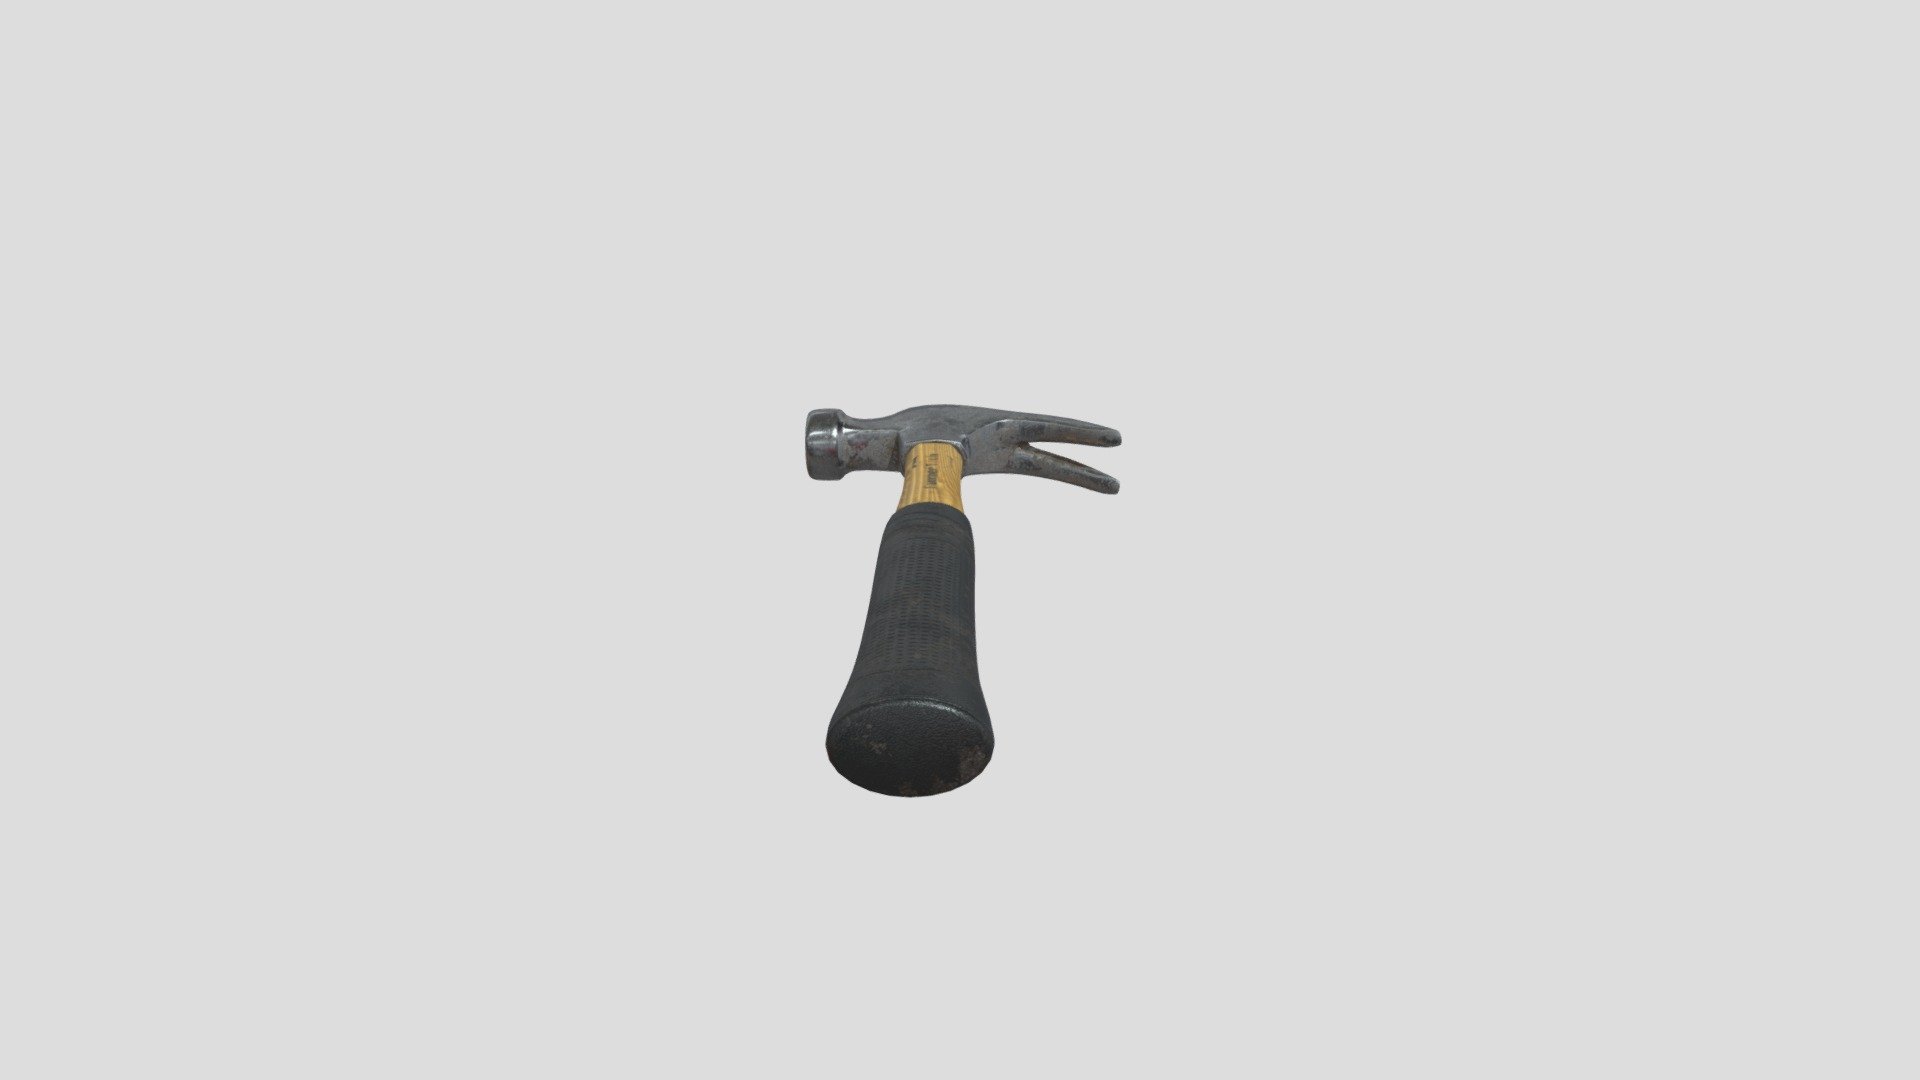 A black and wooden hammer asset created in Blender and textured in Substance Painter, perfect for factory environments or game tools 3d model